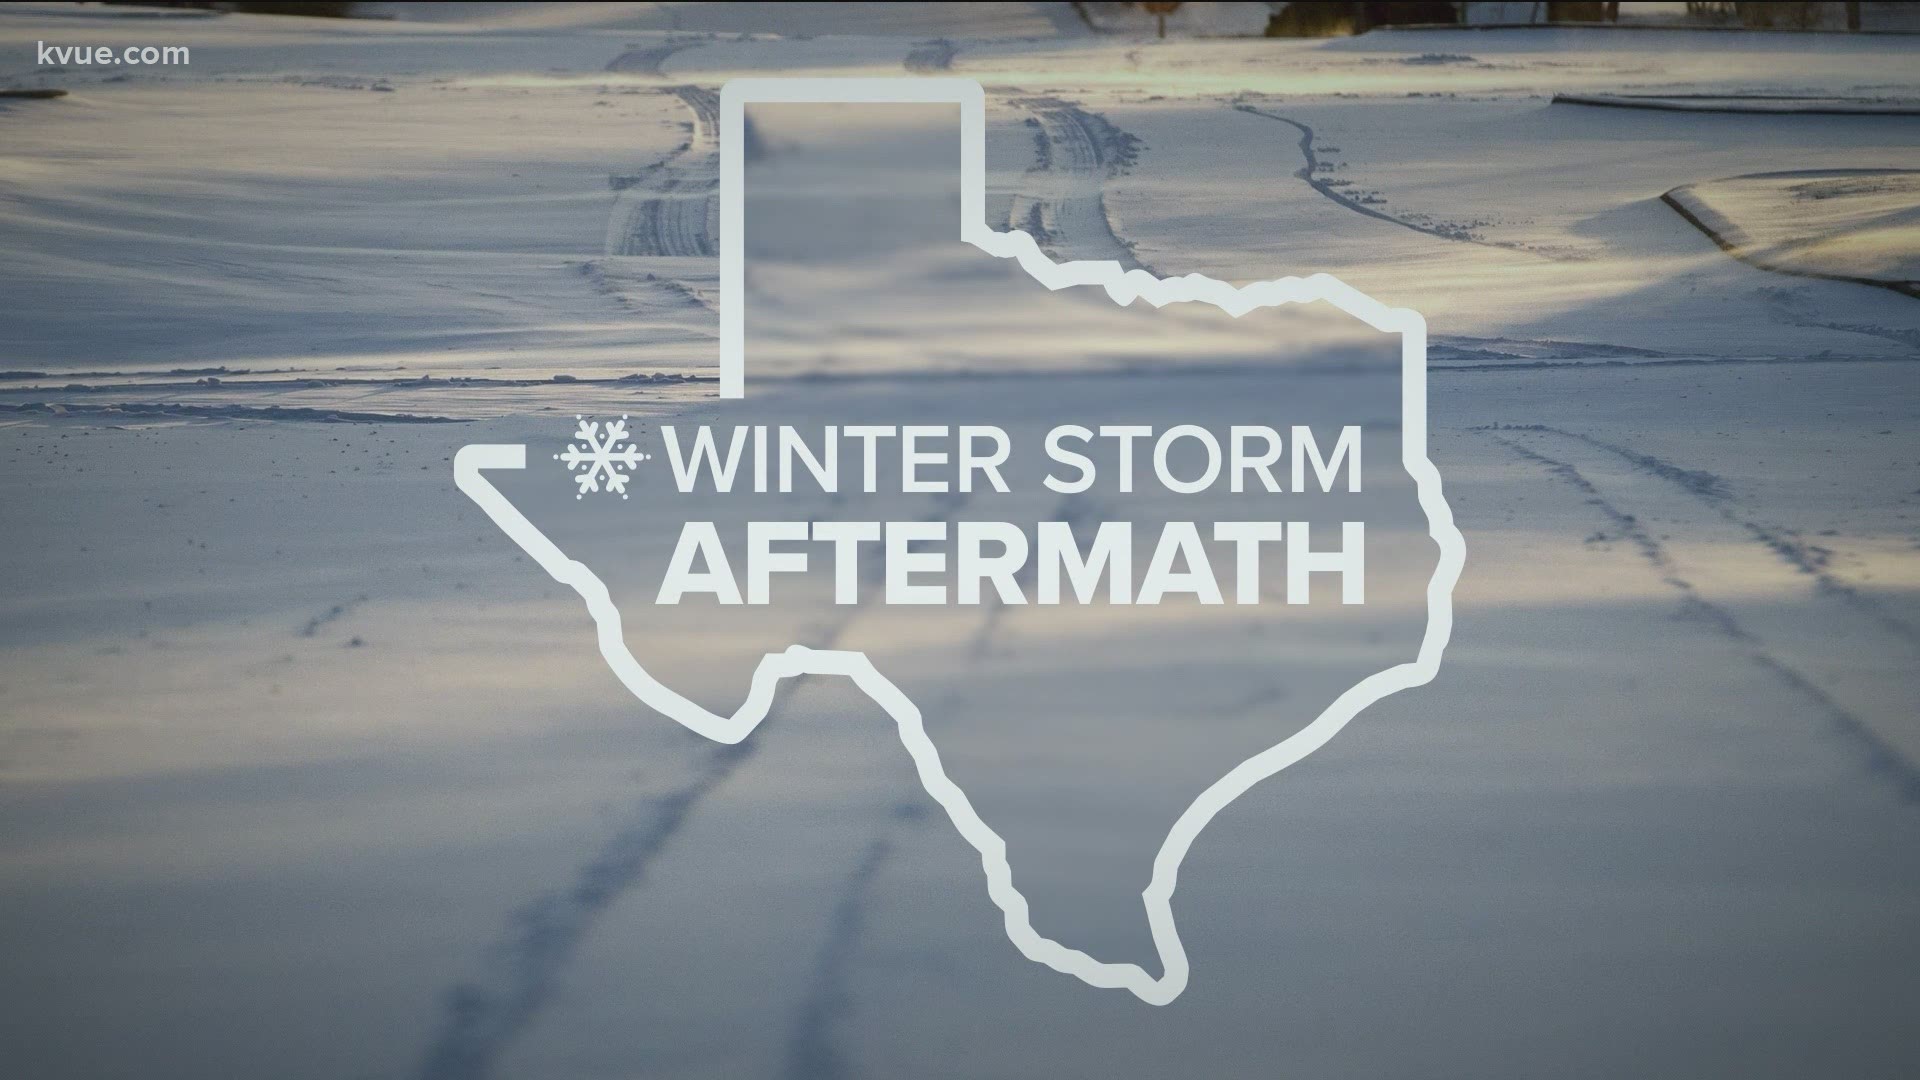 There is now a petition calling for an independent investigation into what went wrong during February's deadly winter storms.